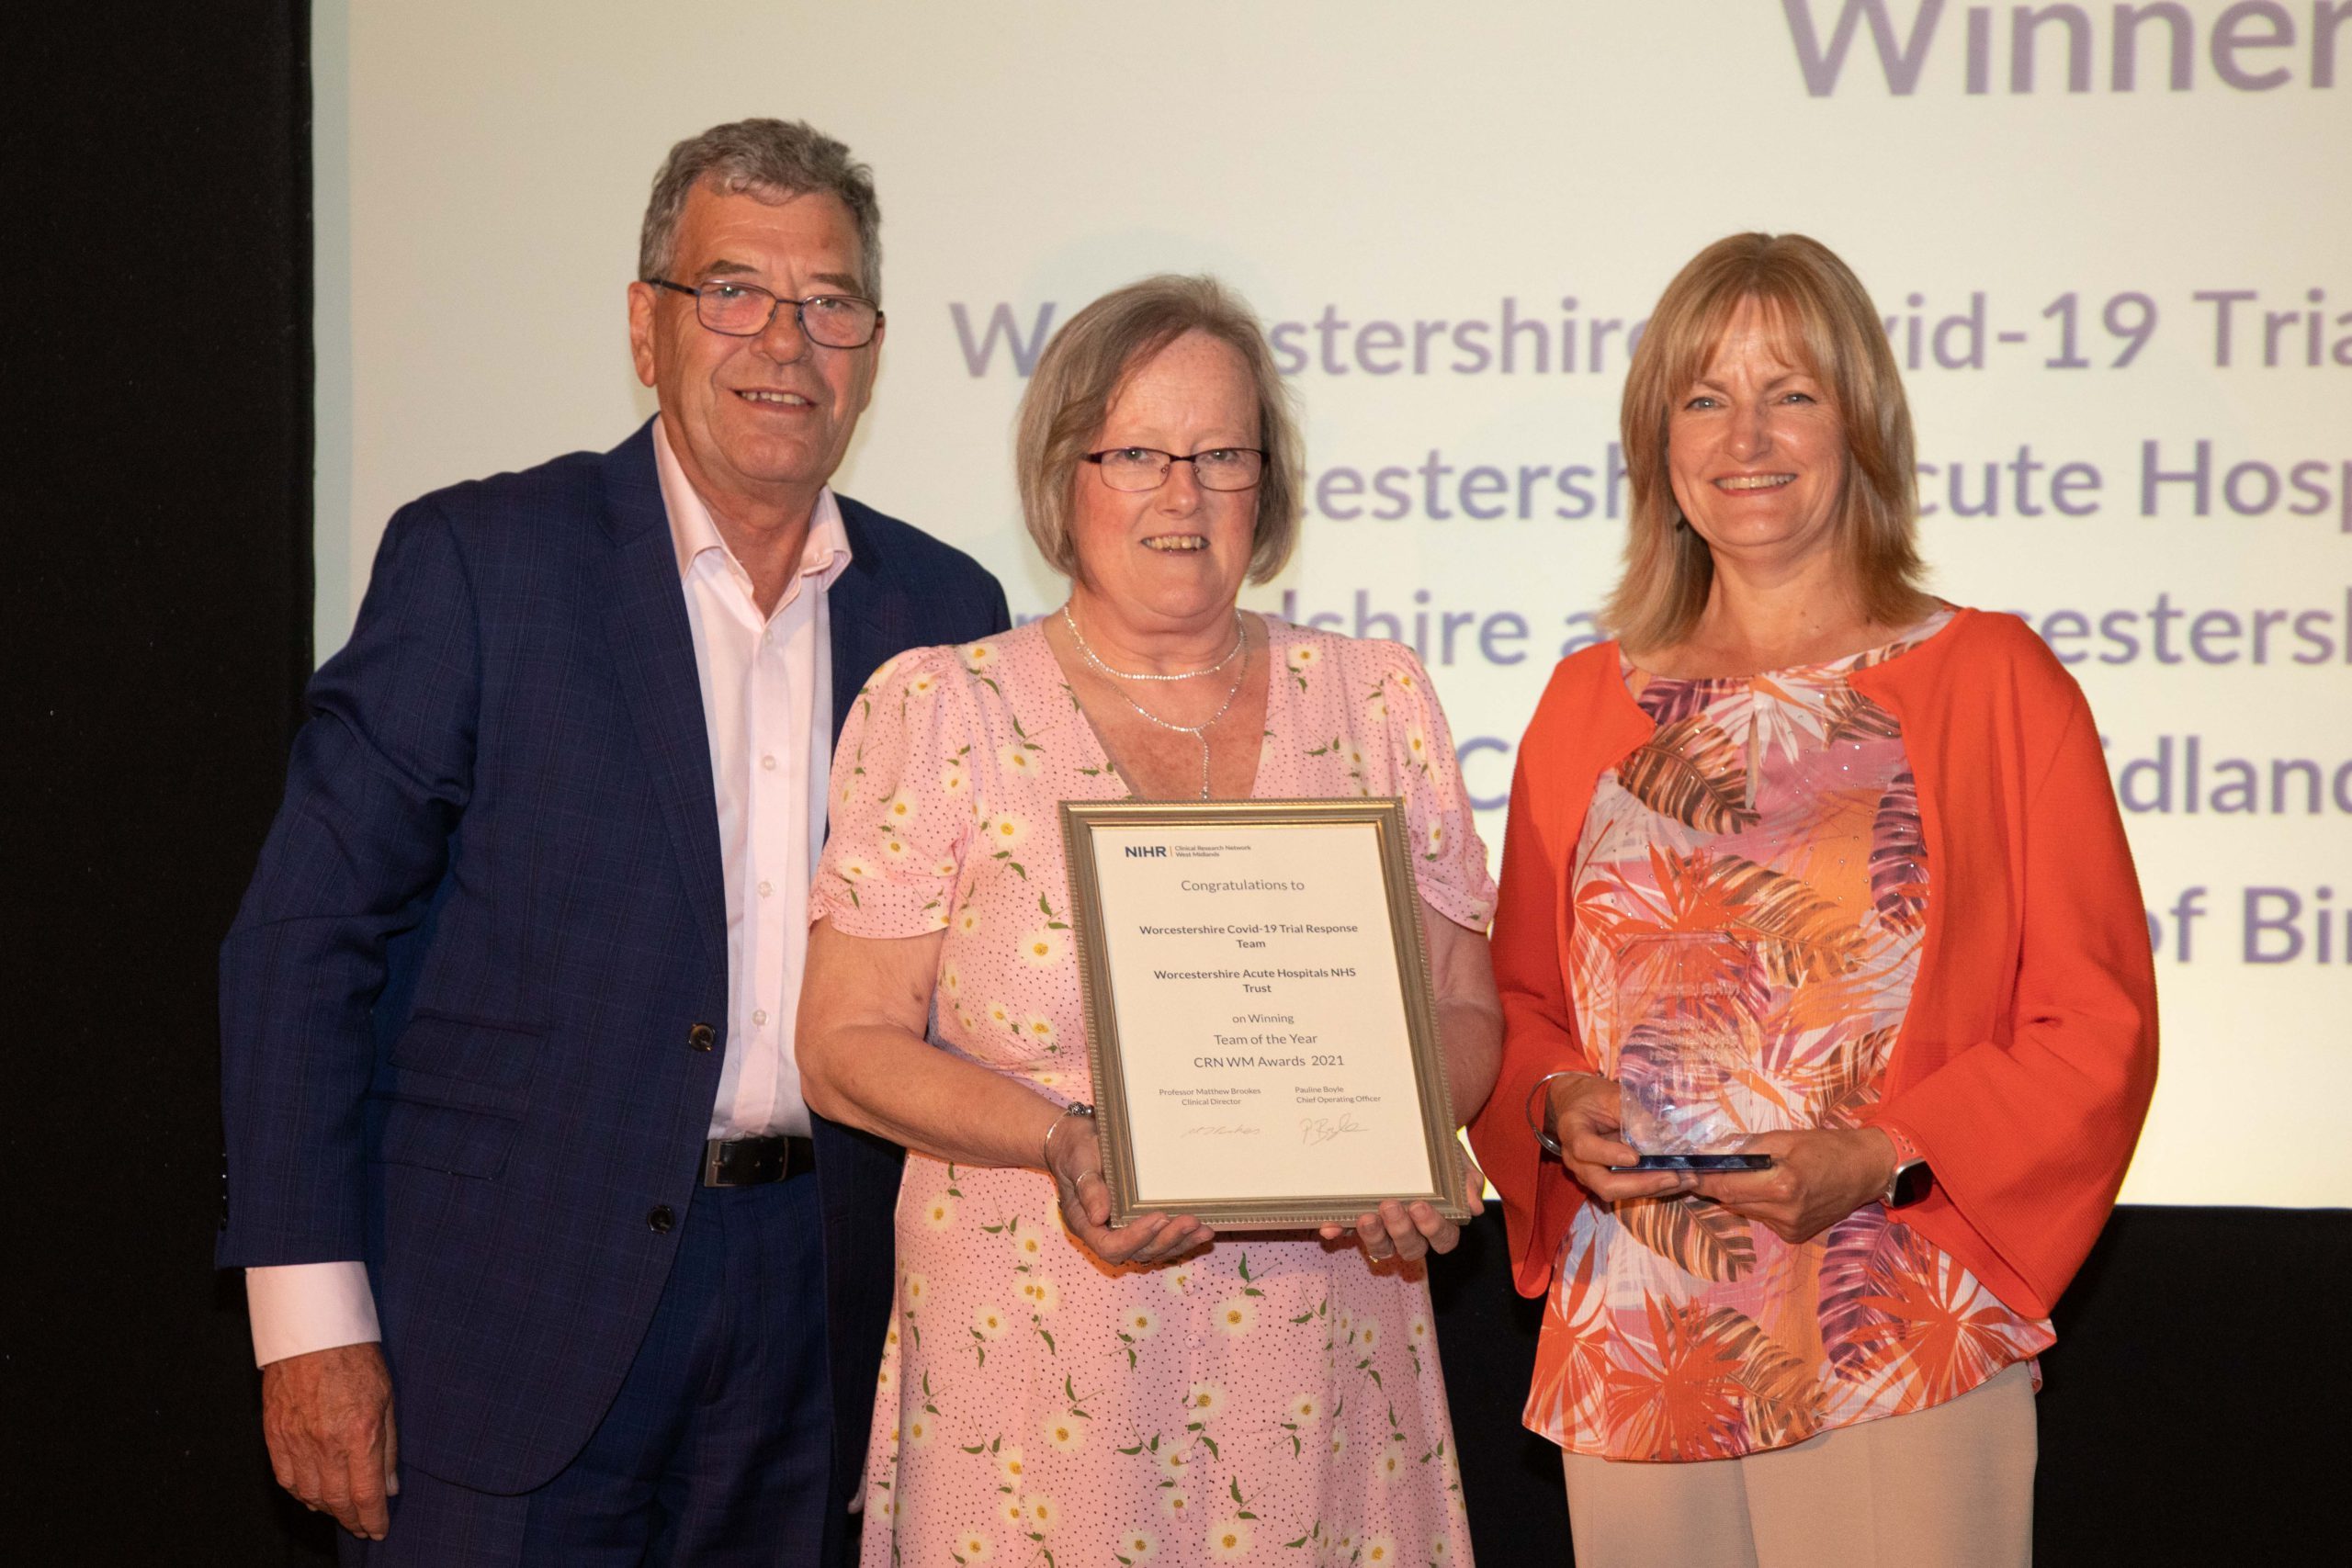 The Clinical Research Team at Worcestershire Acute Hospitals NHS Trust have won ‘Team of the Year’